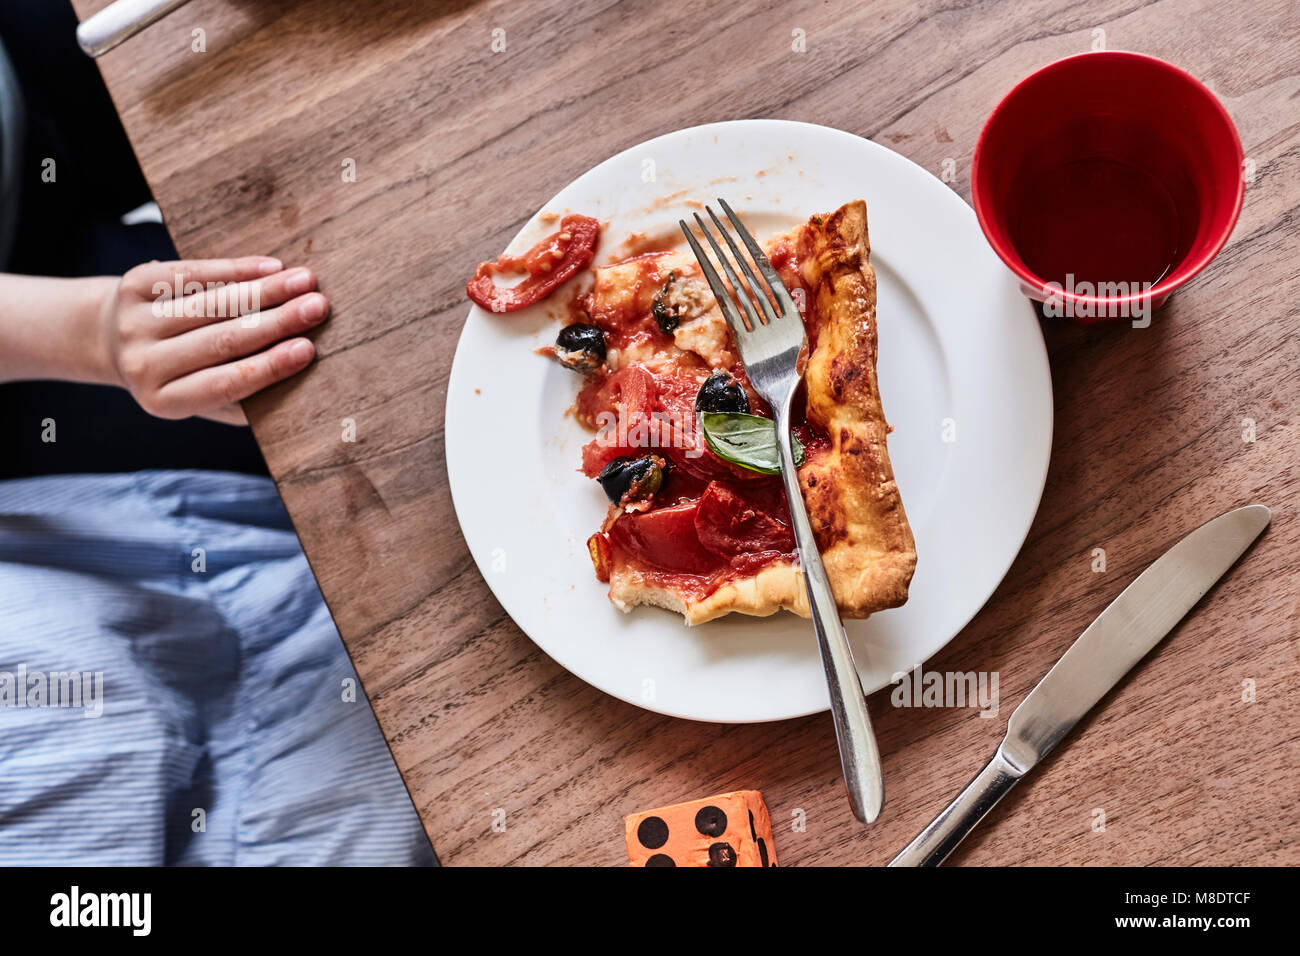 Slice of pizza on white plate, child's hand on table, mid section, elevated view Stock Photo